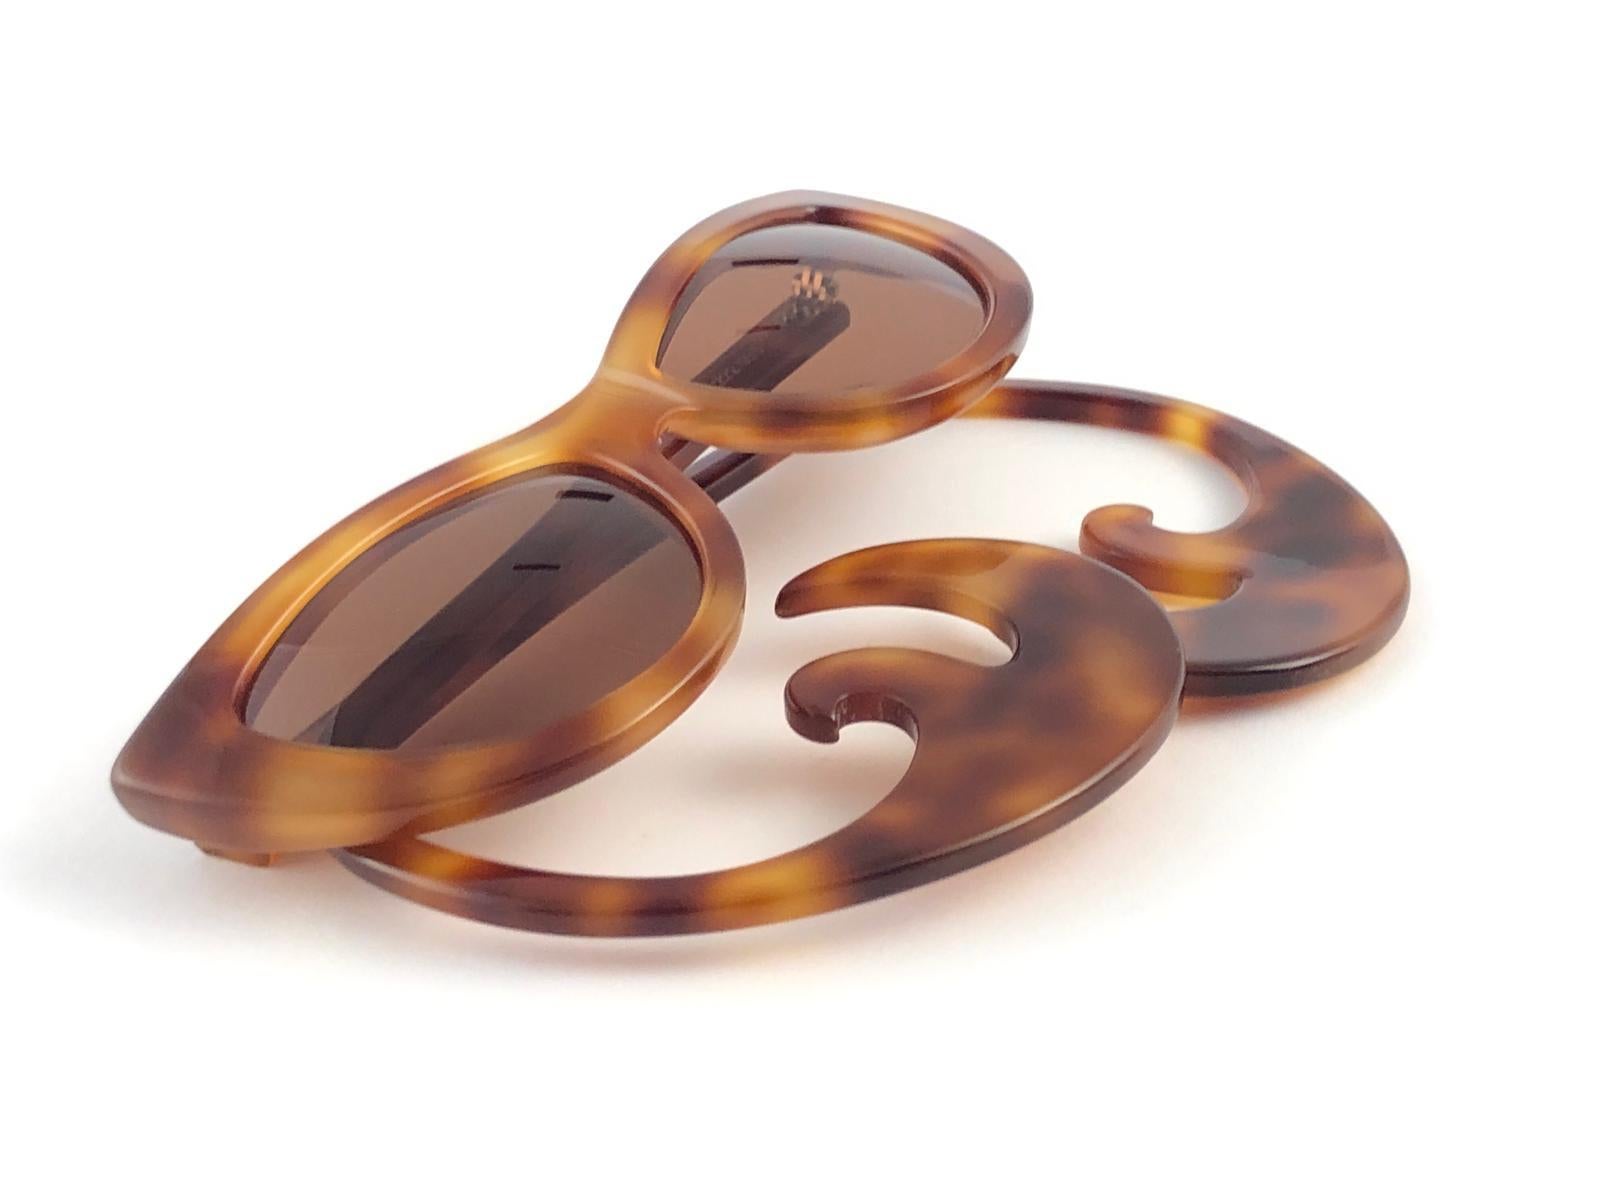 Seldom Vintage Ultra rare Alain Mikli for Chantal Thomass CT87 tortoise sculptural curled temples. An absolute showstopper.

Medium brown lenses.

Please consider that this item is nearly 40 years old so it could show minor sign of wear due to